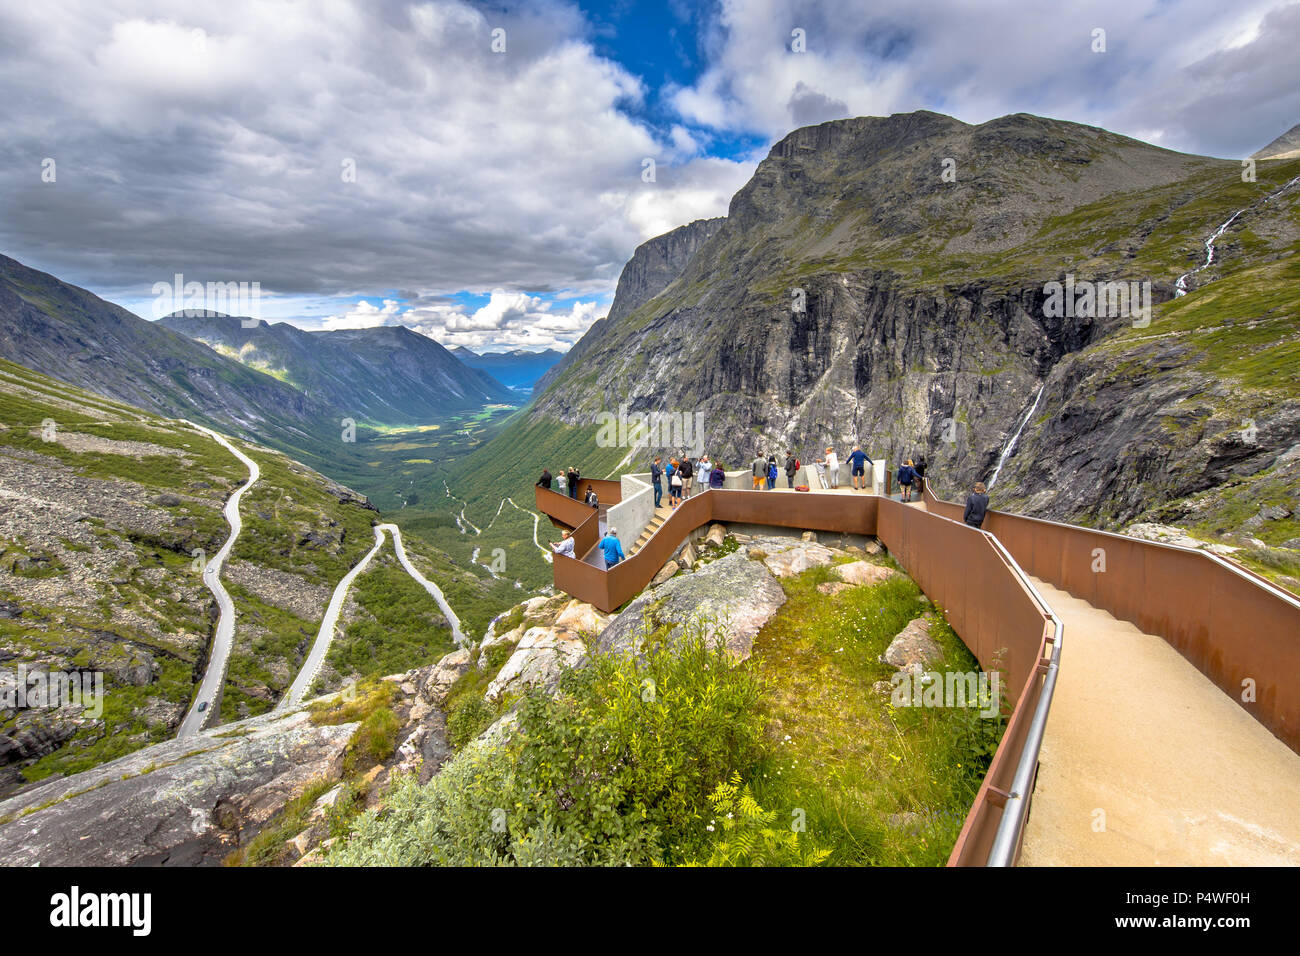 Tourists on viewing balcony at Trollstigen road tourist attraction in More og Romsdal region Norway Stock Photo